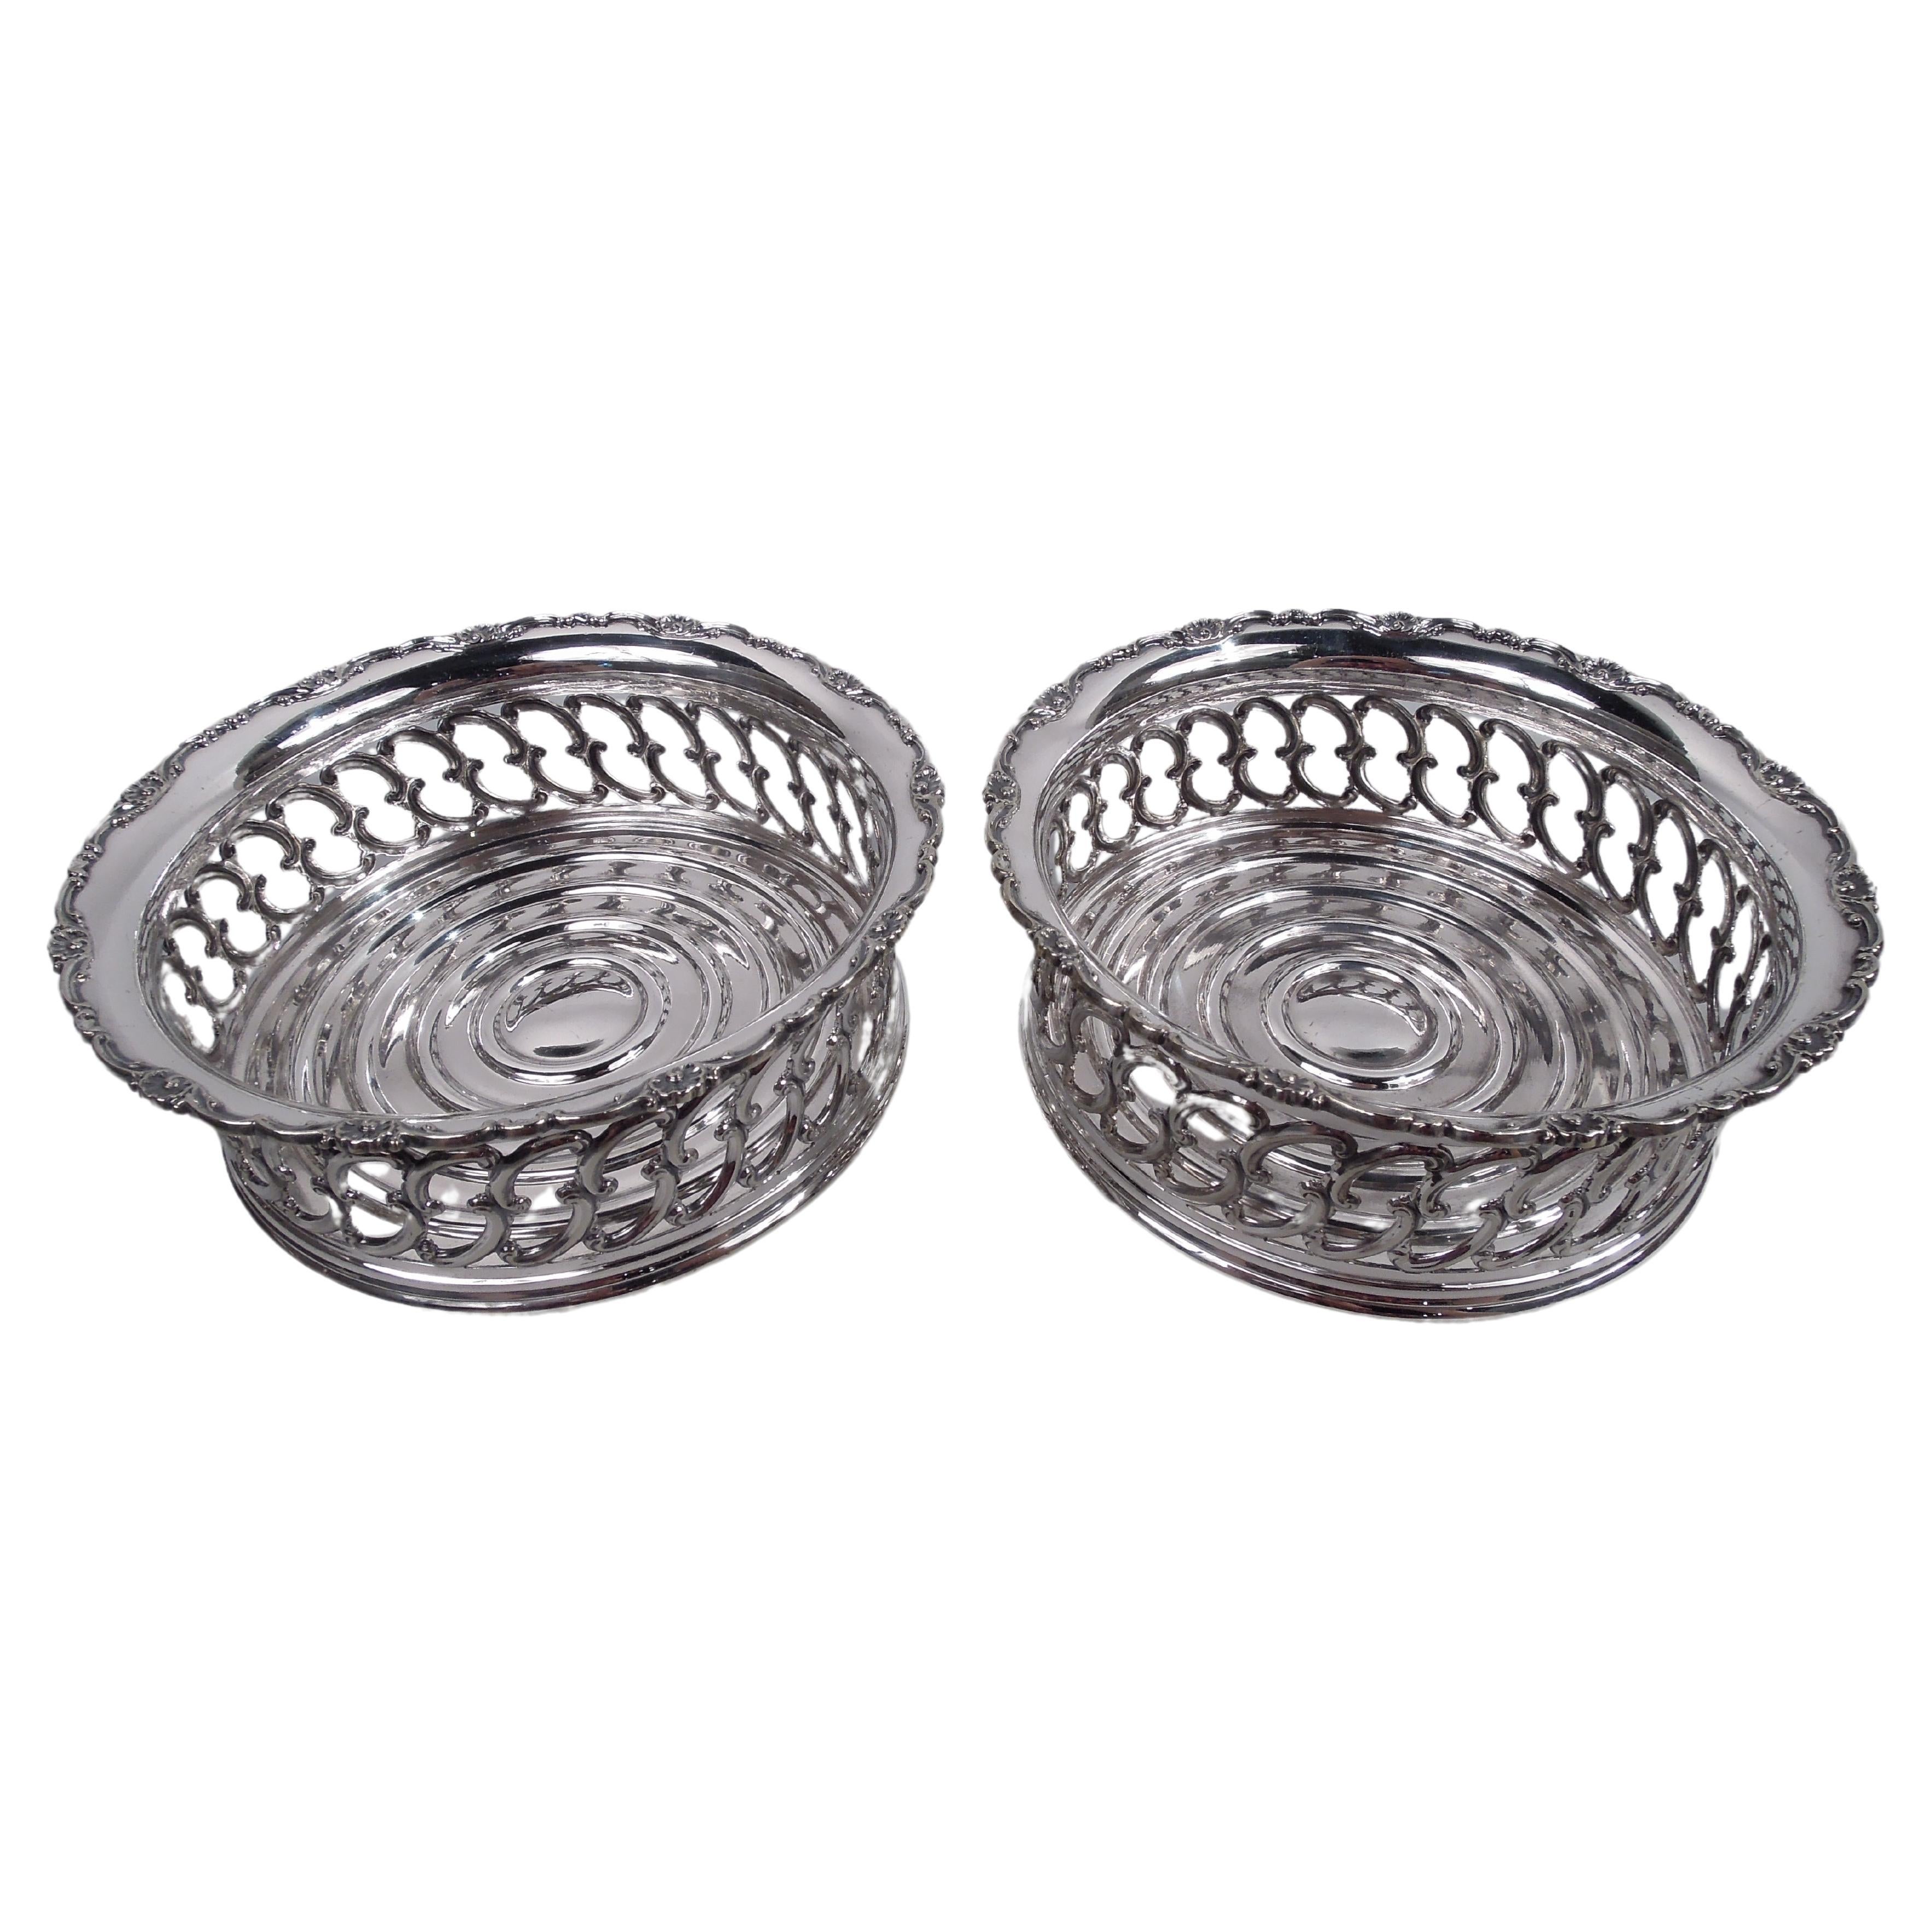 Pair of Tiffany Edwardian Classical Silver-Plated Wine Bottle Coasters For Sale